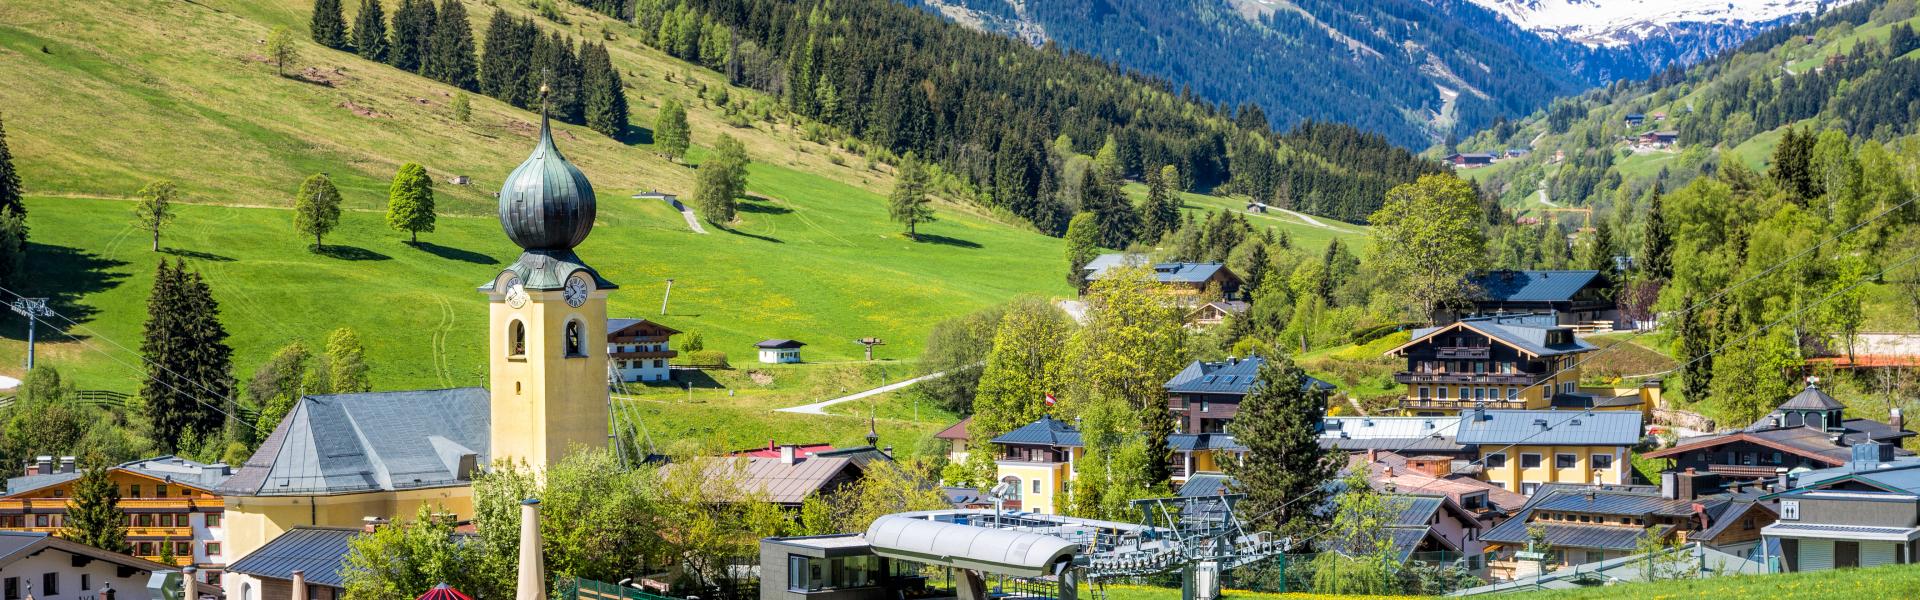 Find the ideal holiday home in Saalbach-Hinterglemm for your Austrian adventure - Casamundo